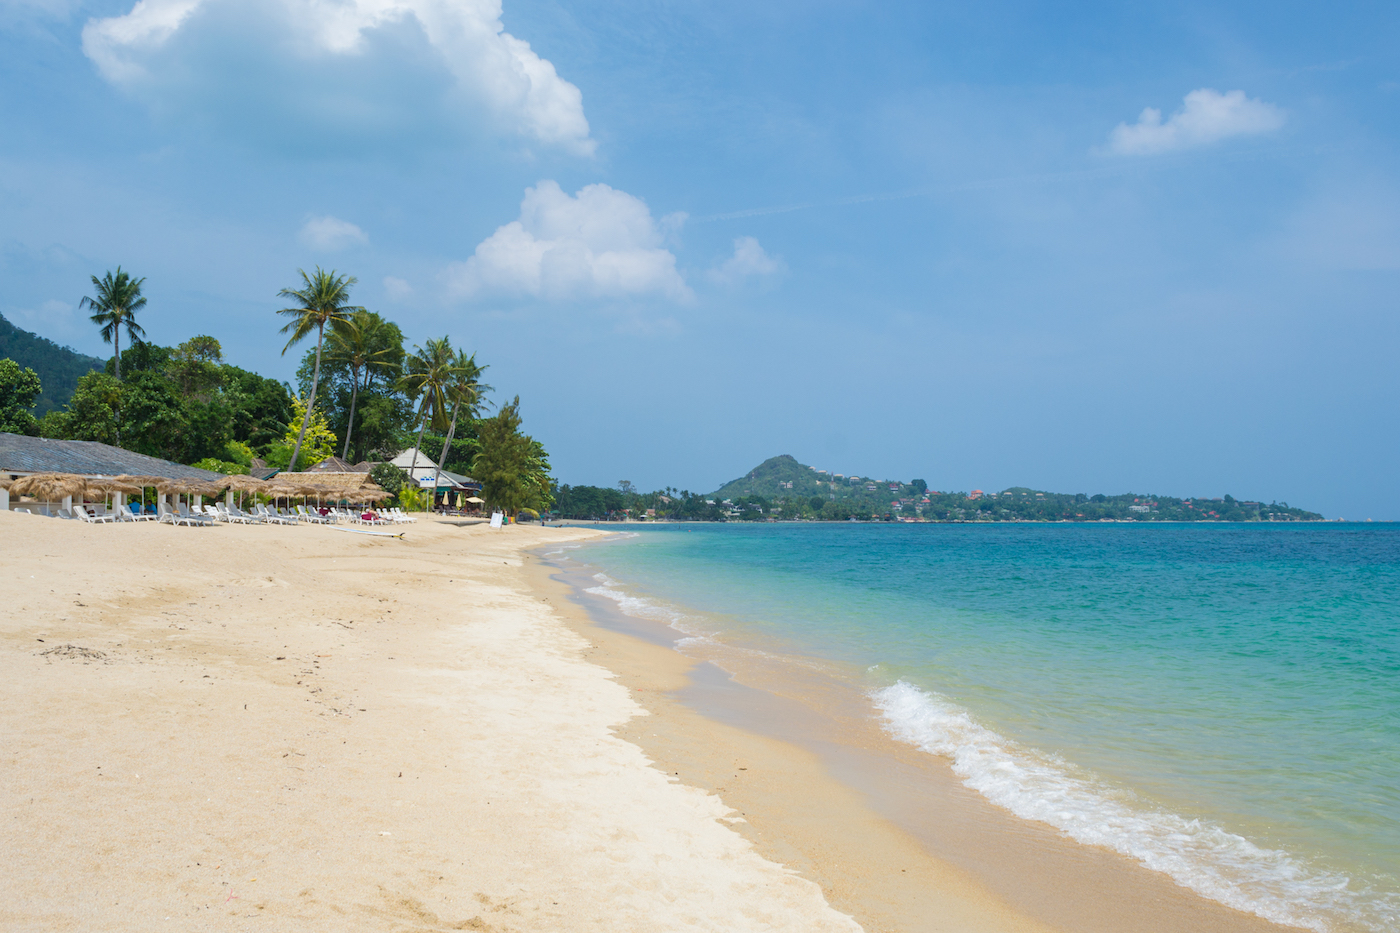 One of the beaches in Koh Samui, Thailand.